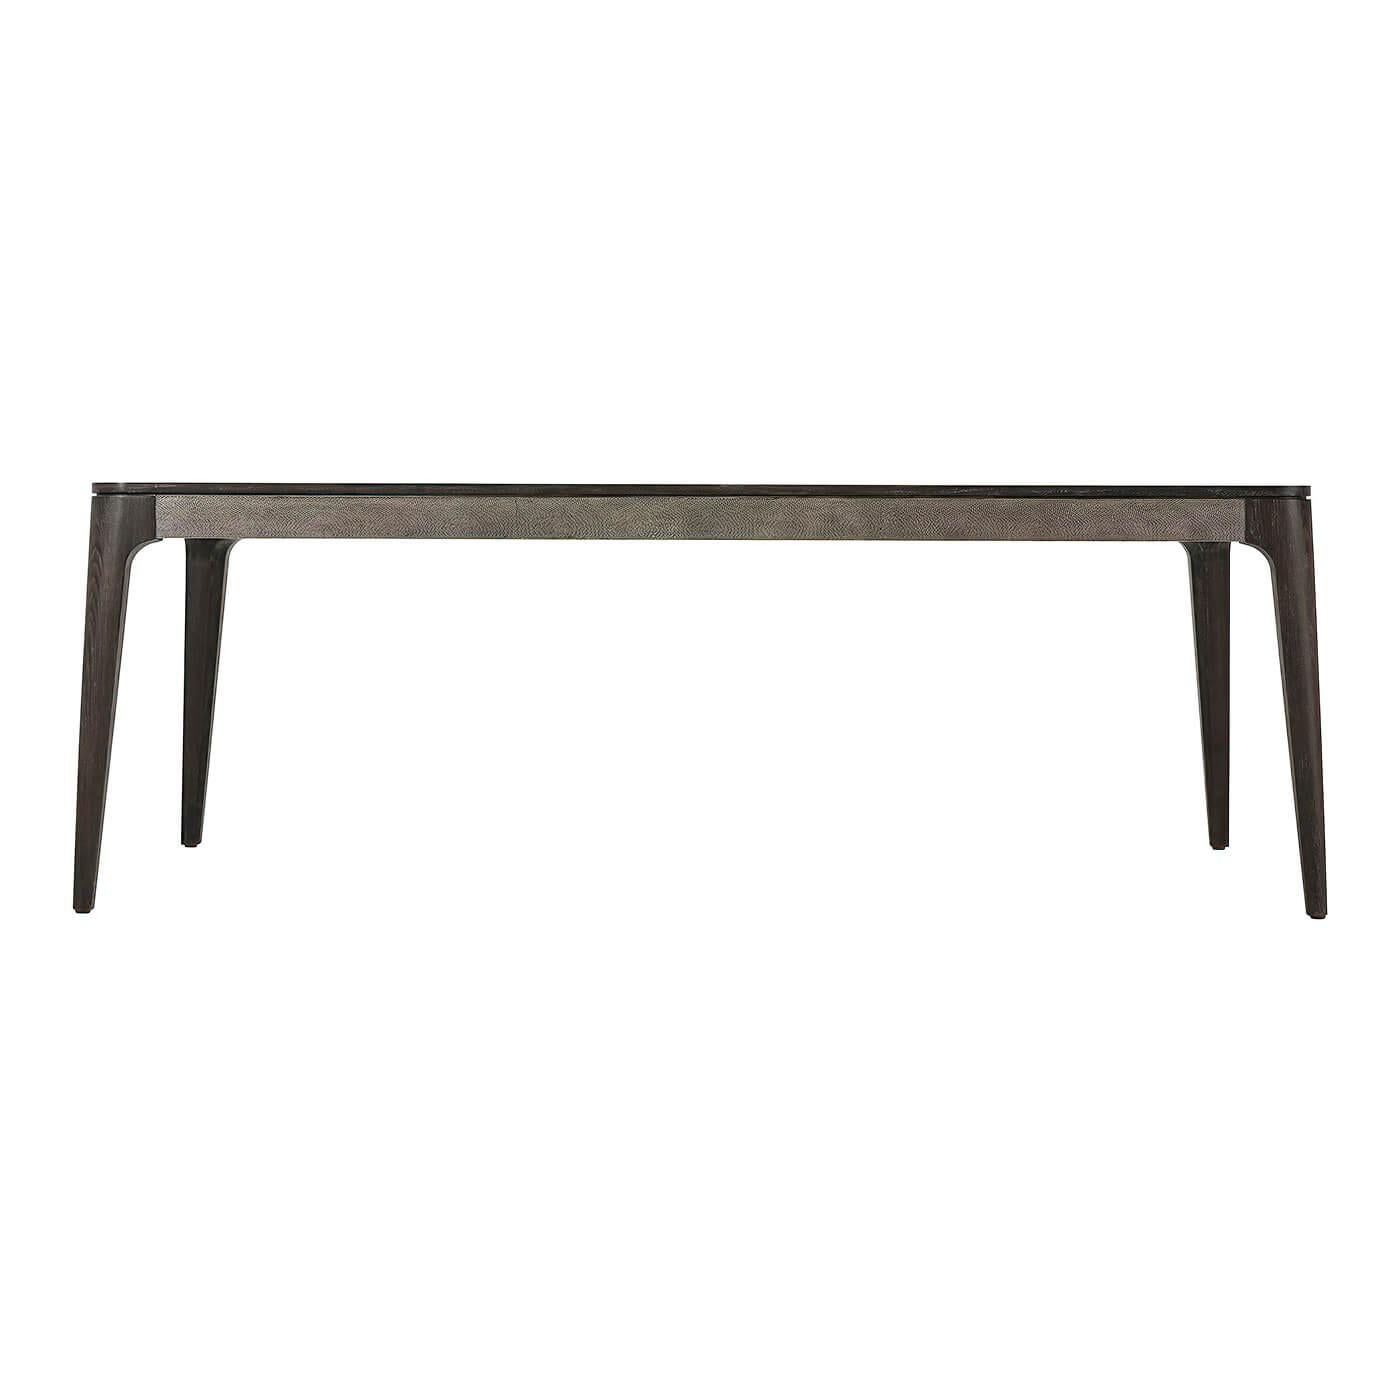 Mid-Century Modern style dining table with Rowan Primavera veneer and Komodo embossed leather frieze with tapering beech legs and rounded exterior edges.

Dimensions: 86